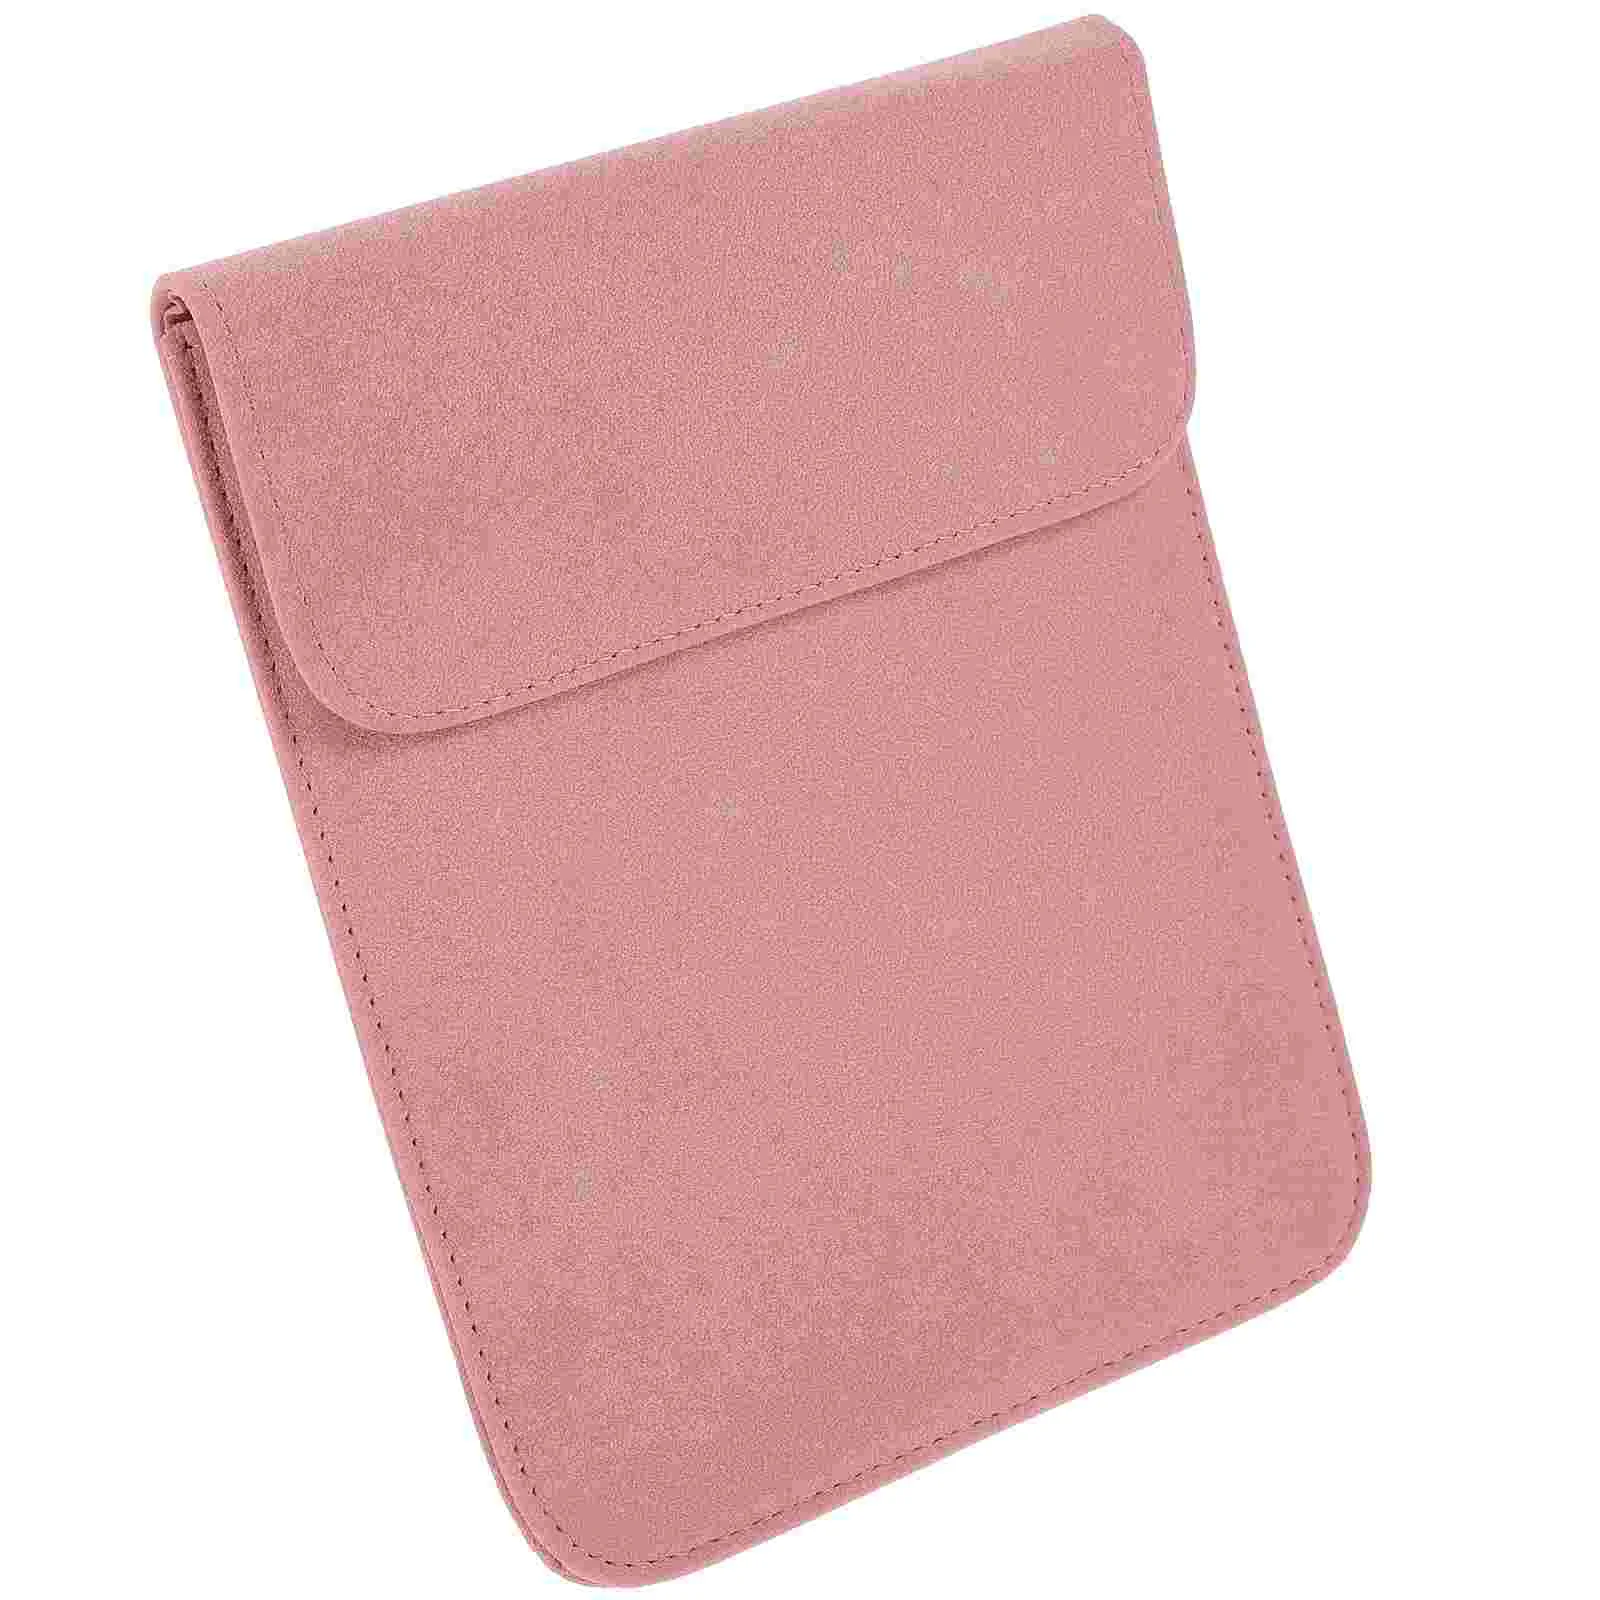 

Ebook Reader -reader Travel Sleeve E-reader Carrying Case Compatible For Paperwhite 4/5